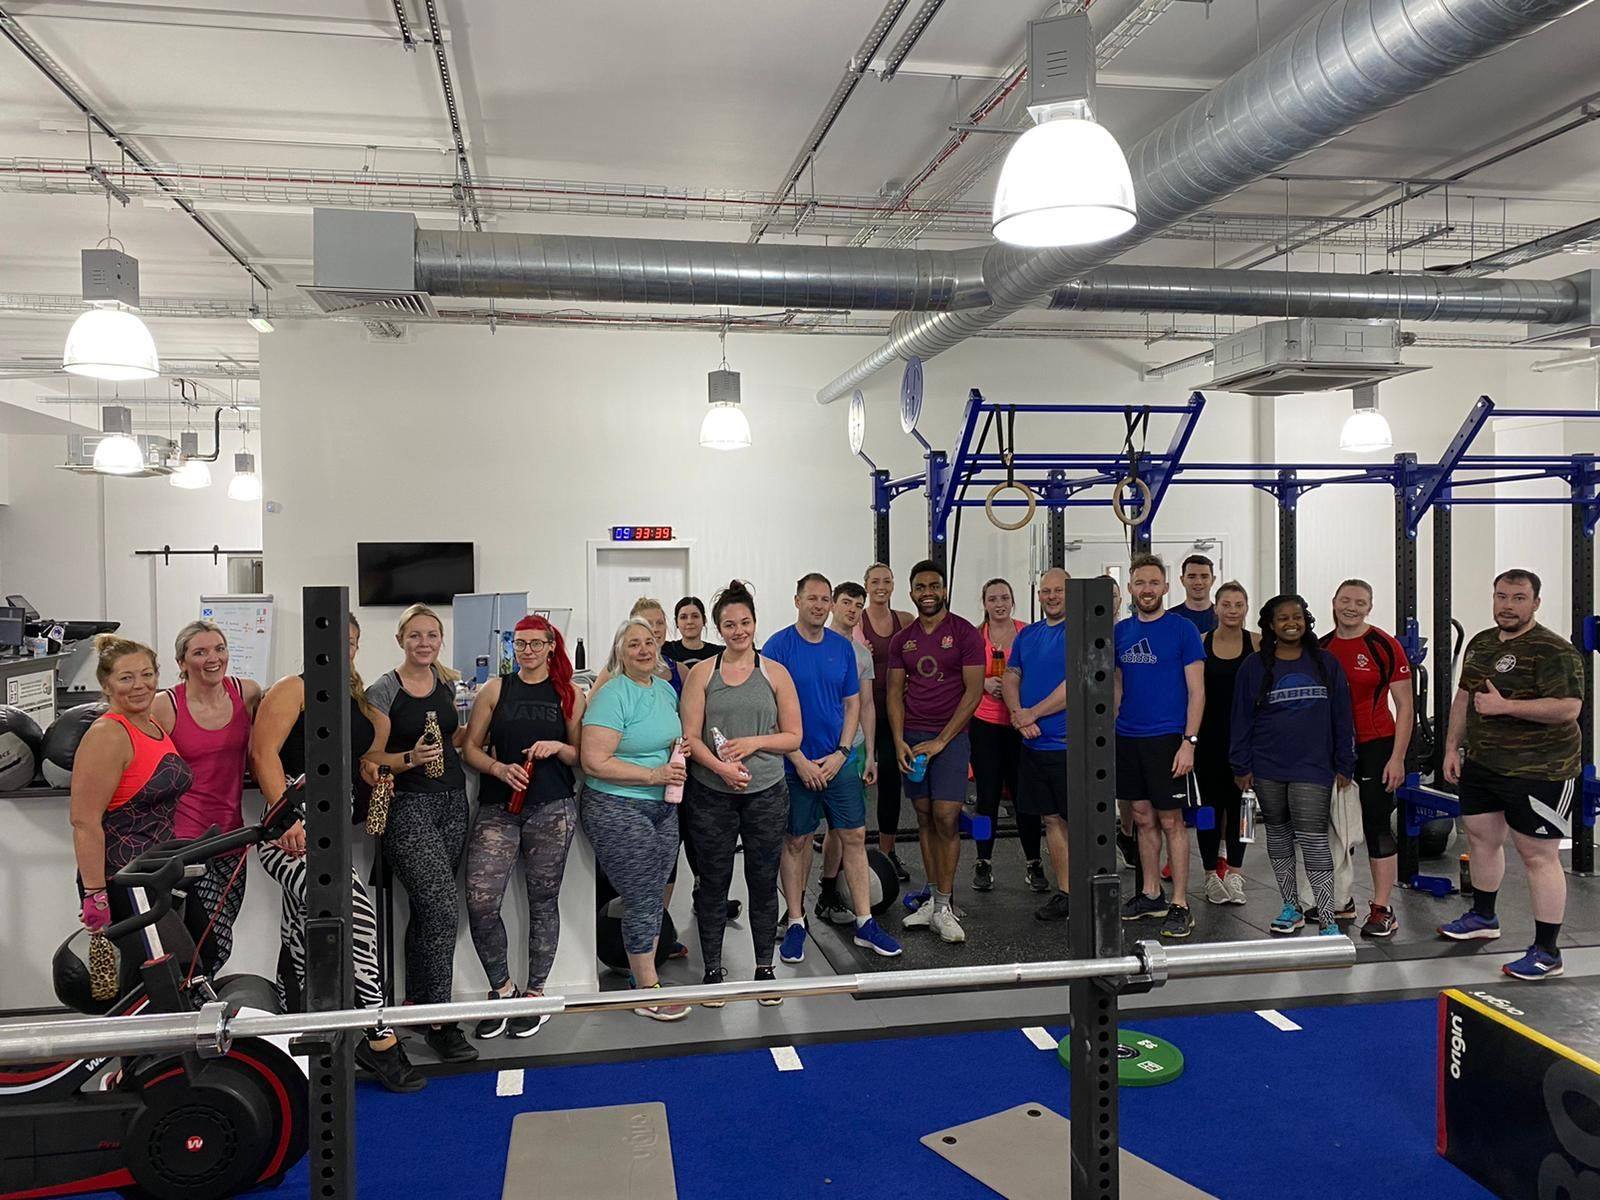 People doing a circuit training class at lift gym in edinburgh